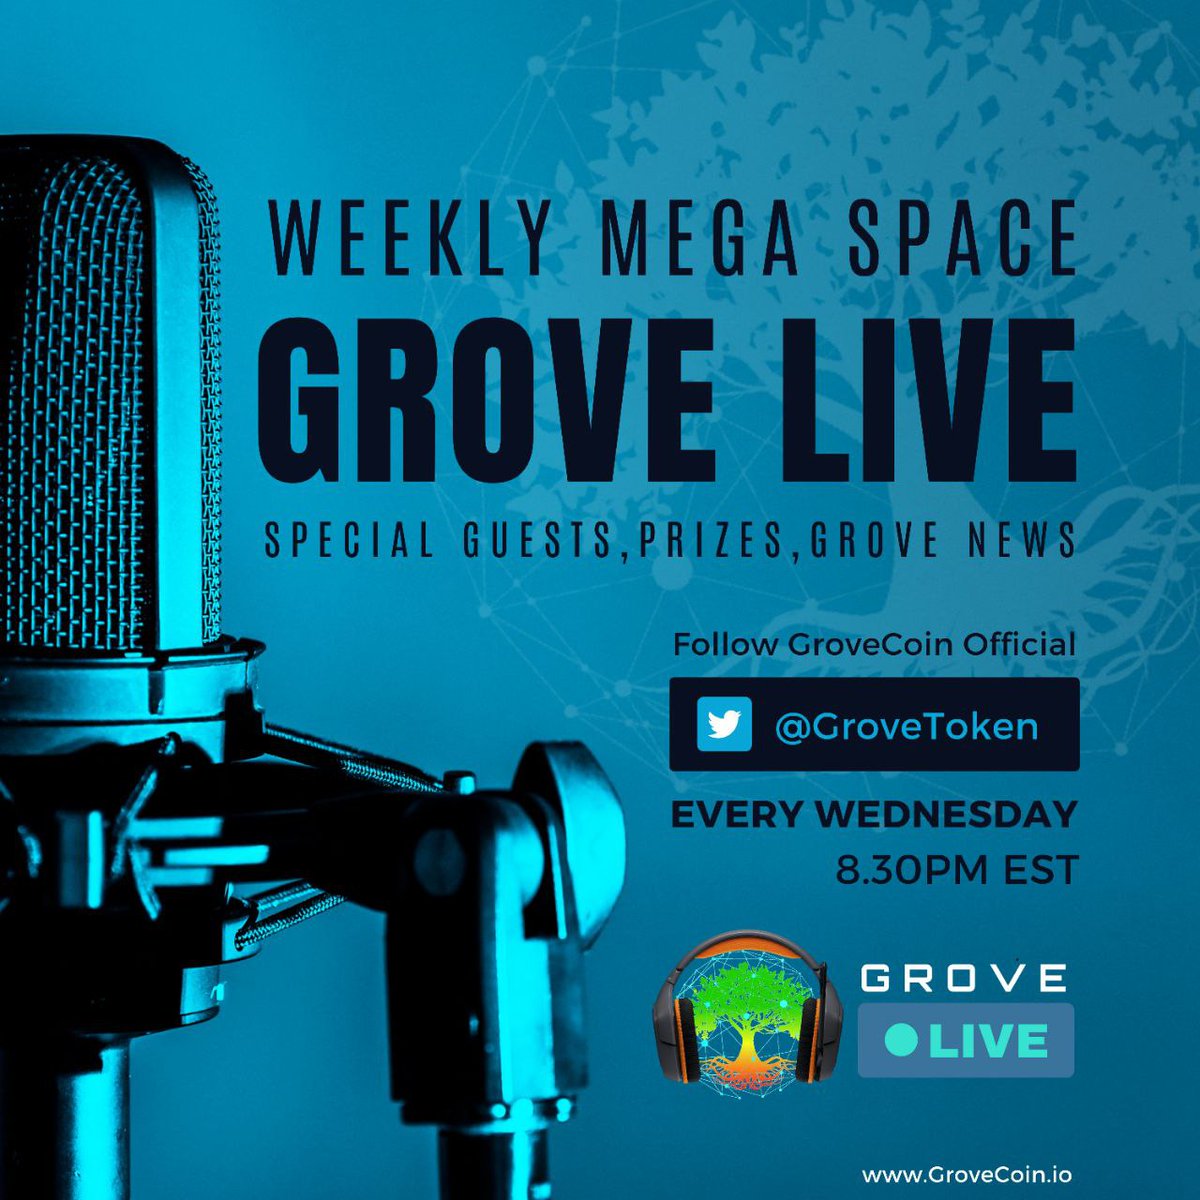 Join the #GroveCoin weekly mega space tonight at 8.30pm EST, with special guest @CarloDCGT, providing updates on #GroveBusiness and more!

twitter.com/i/spaces/1mrGm…

#GroveGreenArmy #GroveSwap #GroveX #GroceBlockchain